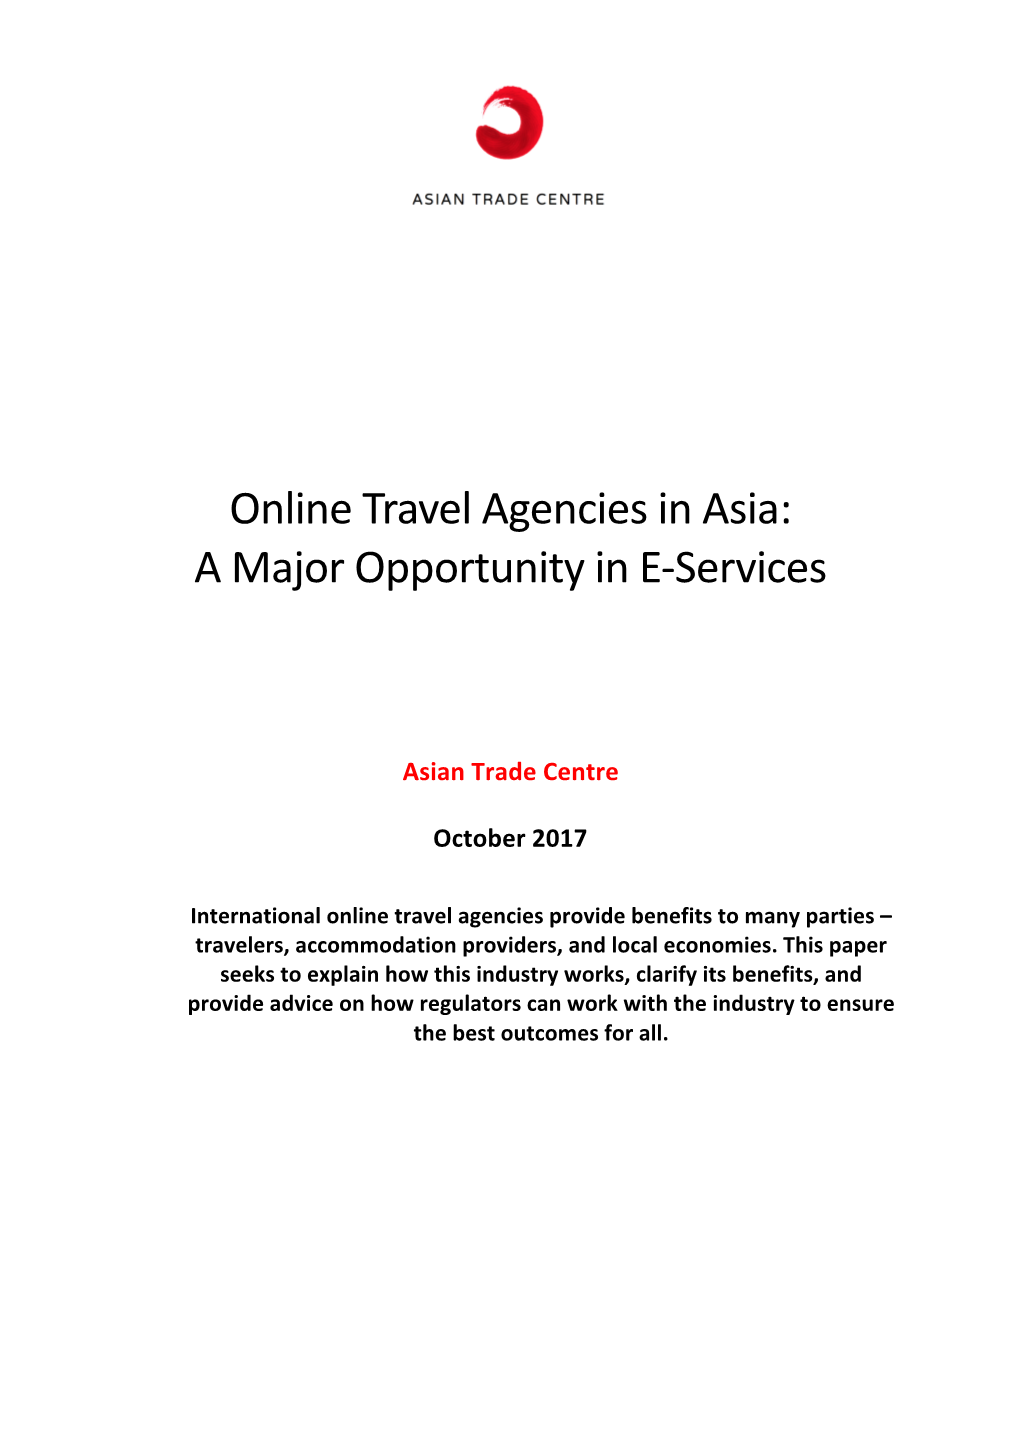 Online Travel Agencies in Asia: a Major Opportunity in E-Services